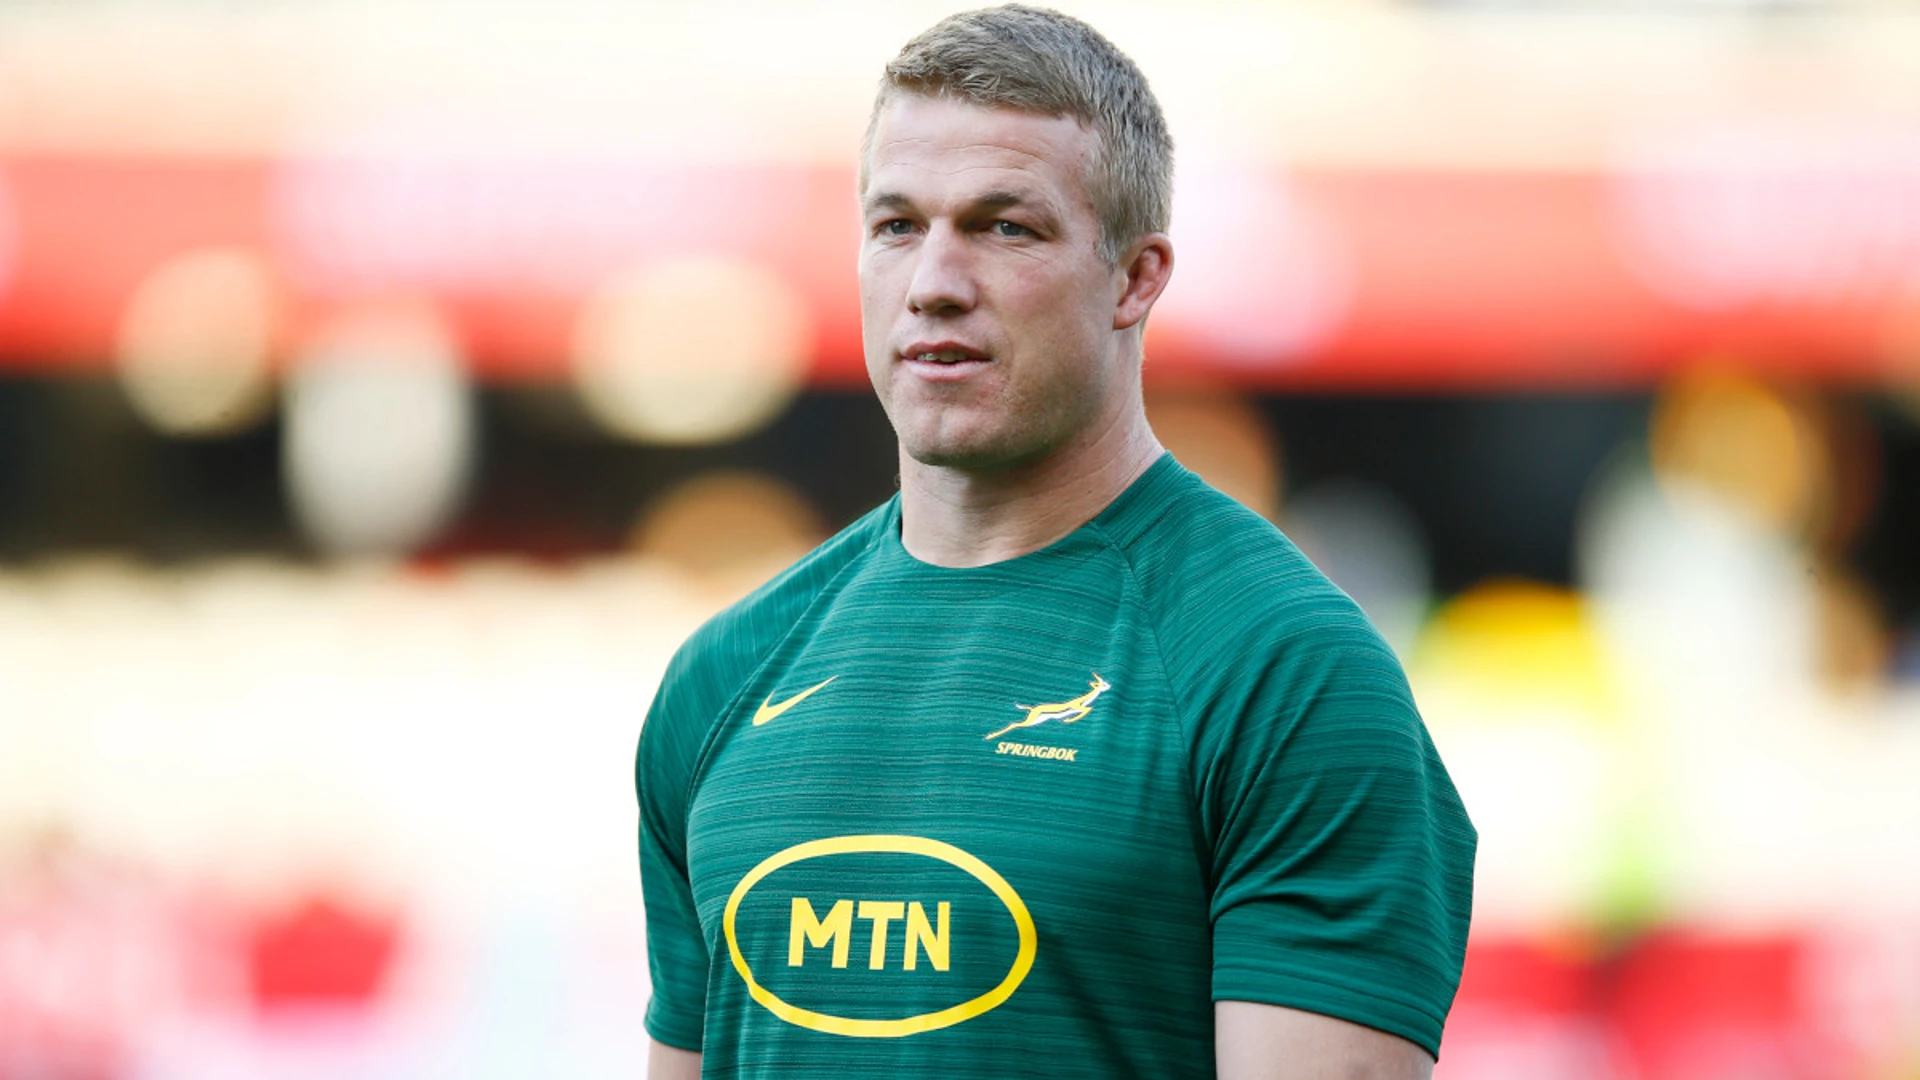 BLOEMFONTEIN PREVIEW: Boks can turn accidents into happy accidents